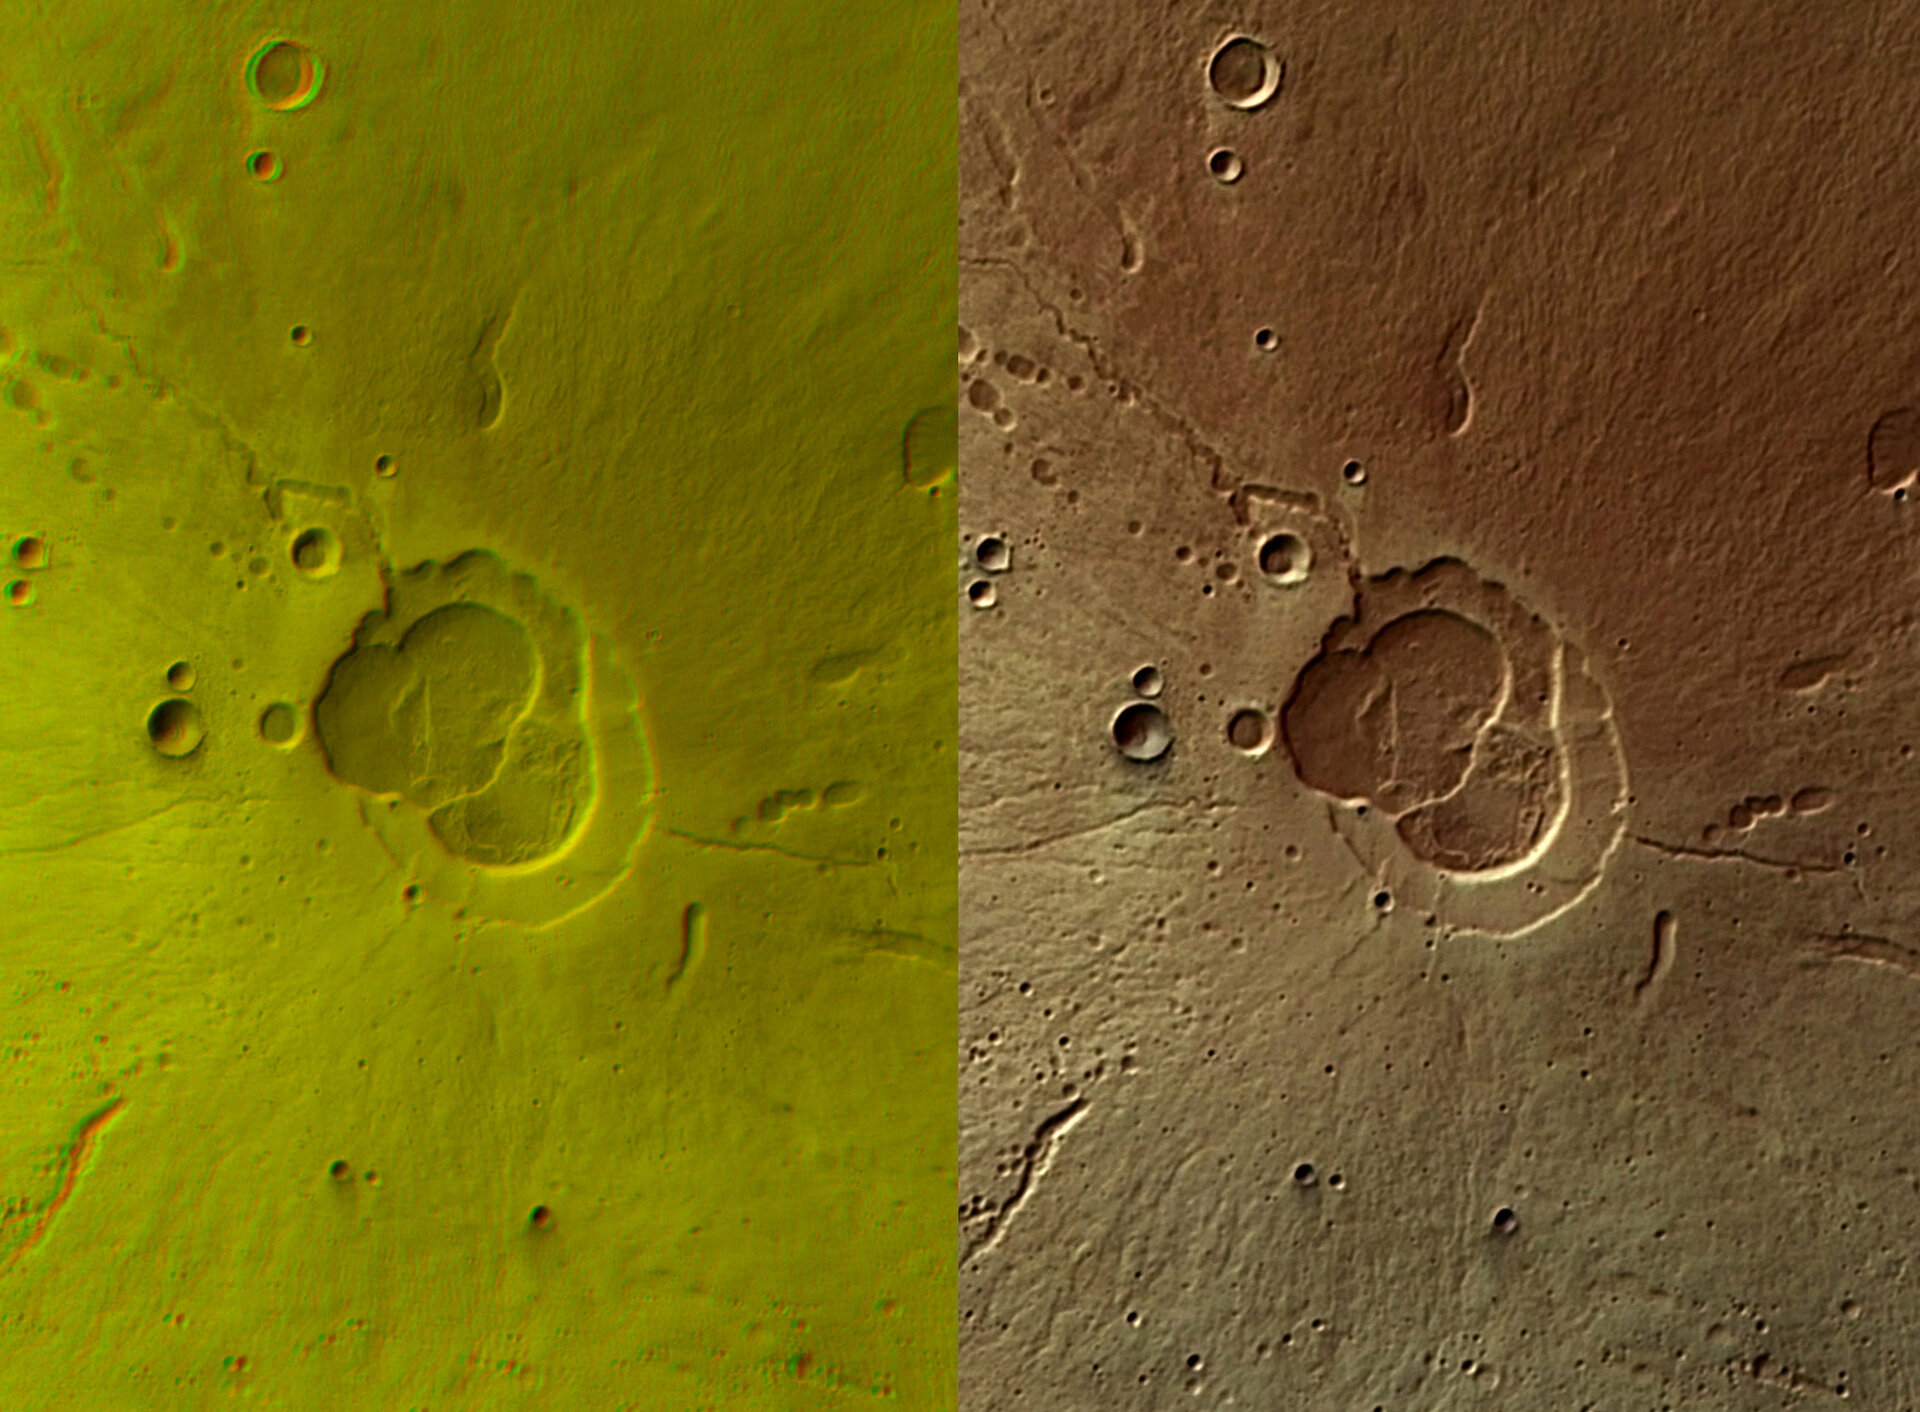 Hecates Tholus volcano in 3D and in colour